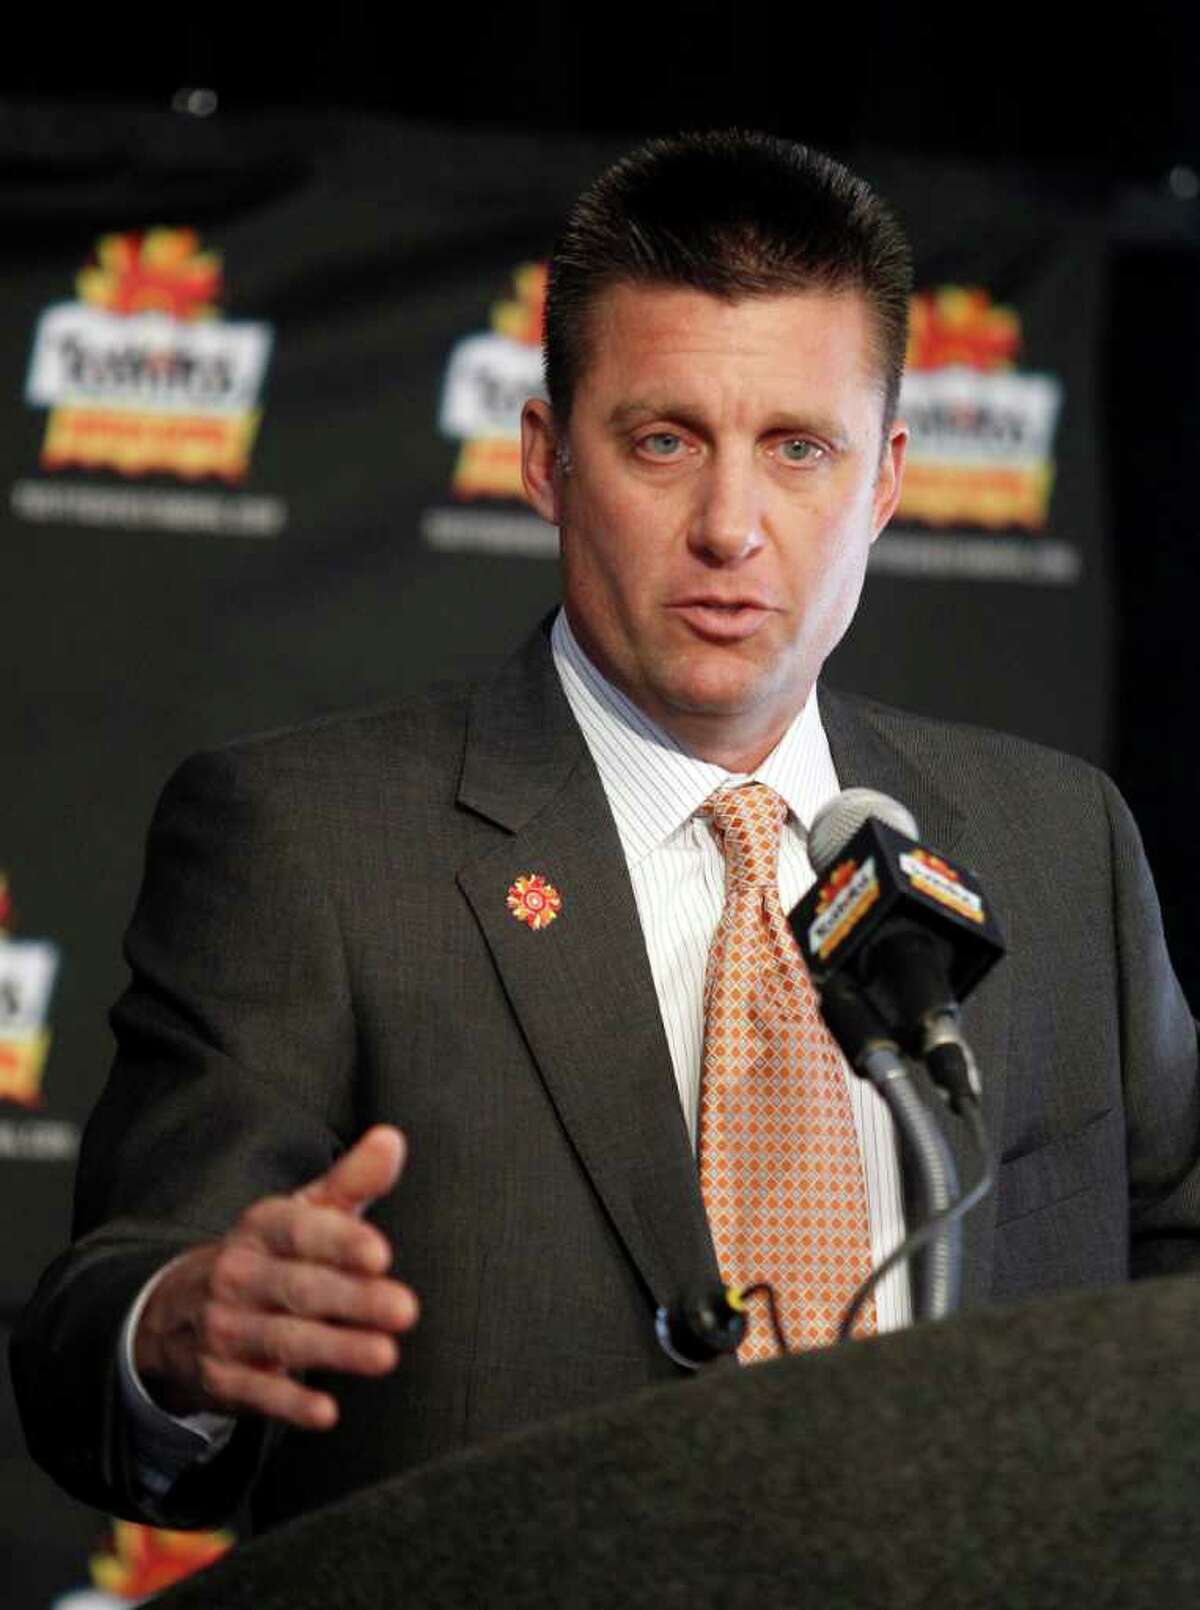 Oklahoma State coach Mike Gundy answers questions during a news conference upon the team's arrival to play Stanford in the Fiesta Bowl NCAA college football game Jan. 2 on Monday, Dec. 26, 2011, at Sky Harbor International Airport in Phoenix. (AP Photo/Paul Connors)